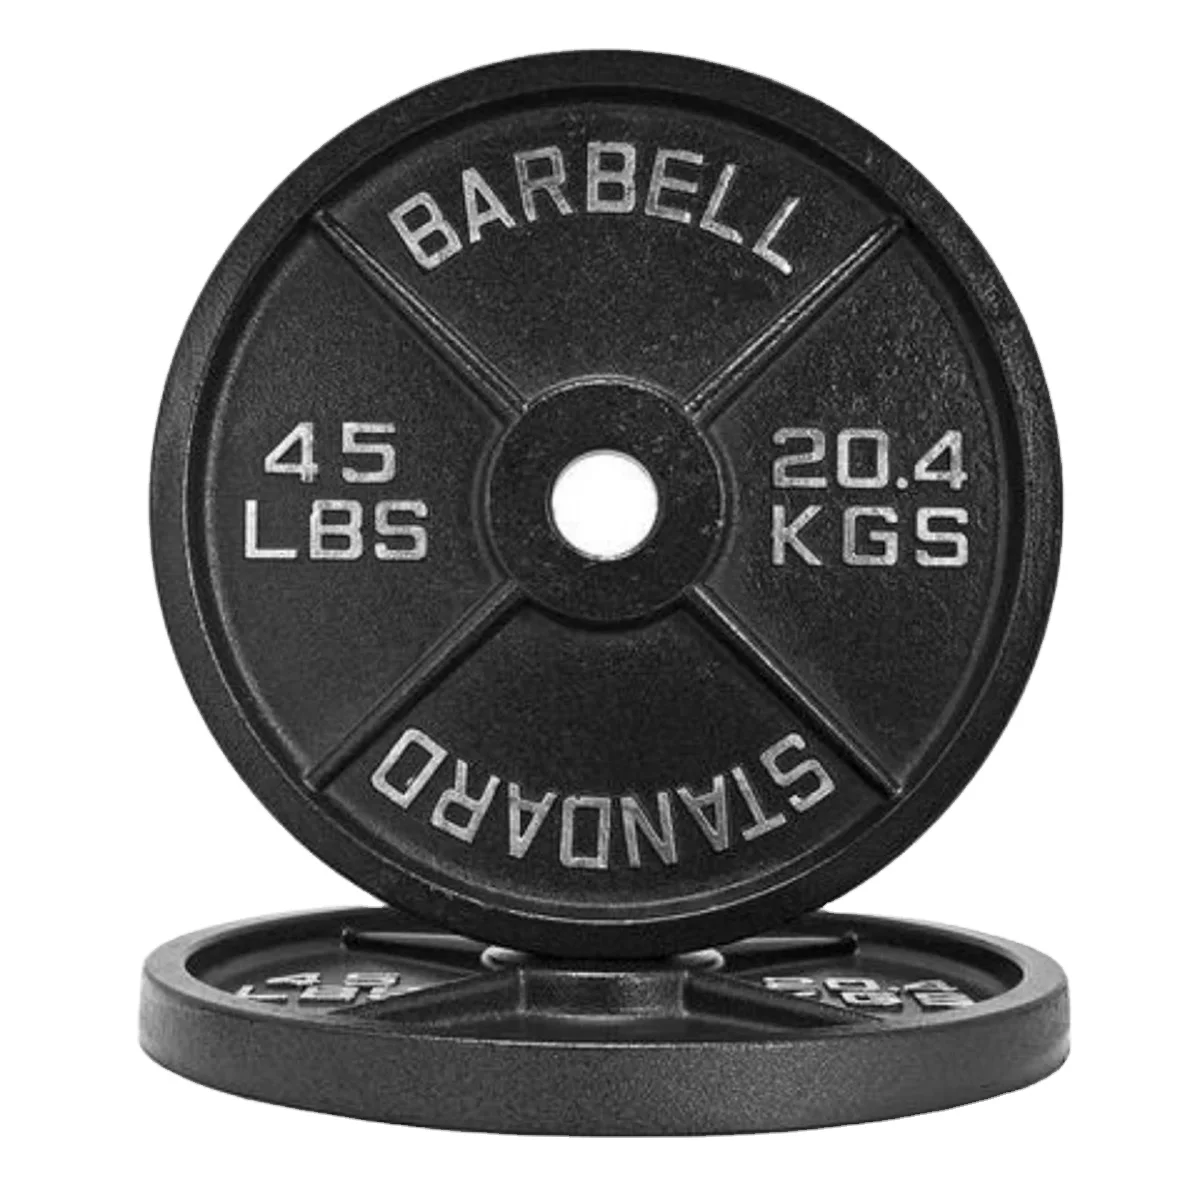 

DW SPORTS Gym Barbell Cast Iron Weight Plate for strength training, Black